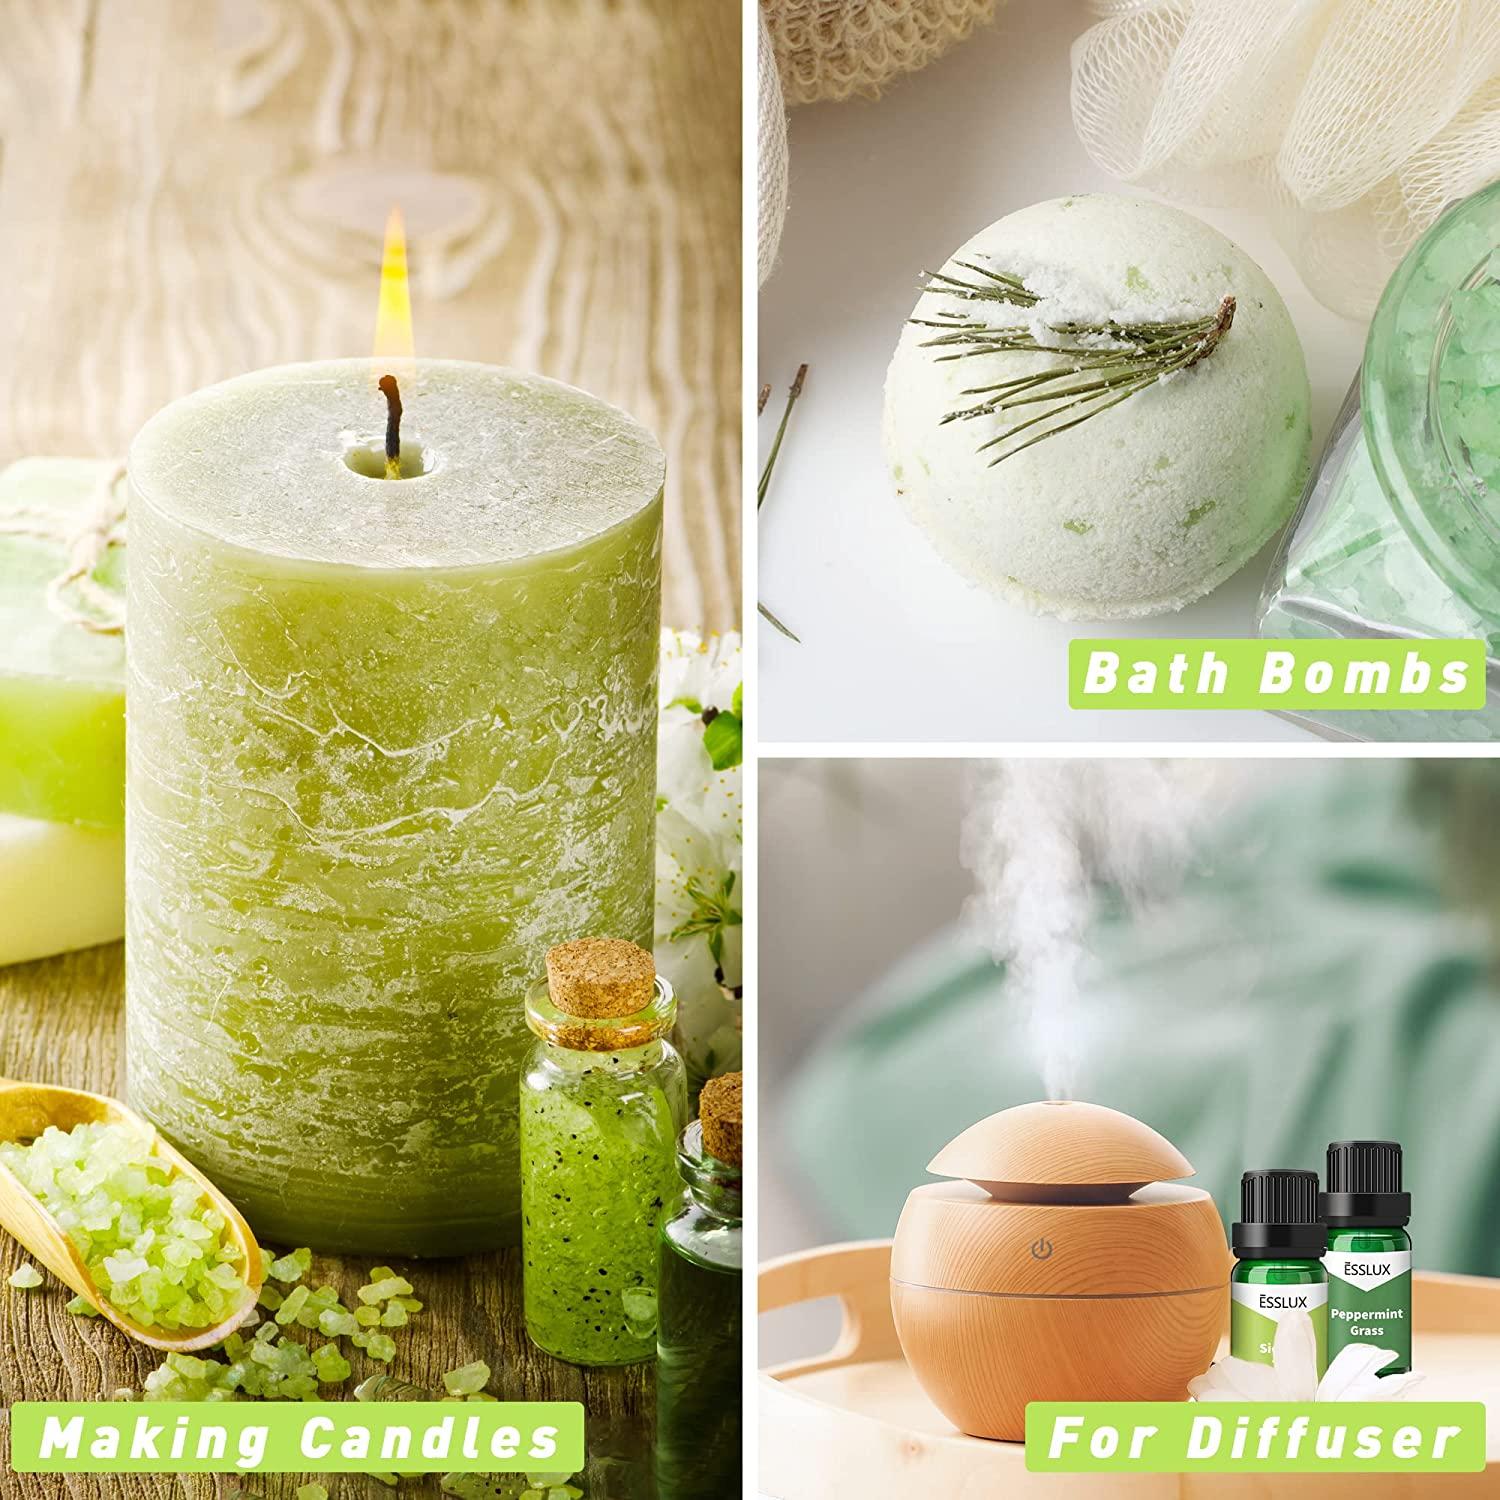 Where to Buy Fragrance Oils for Candles - Singapore Soap Supplies